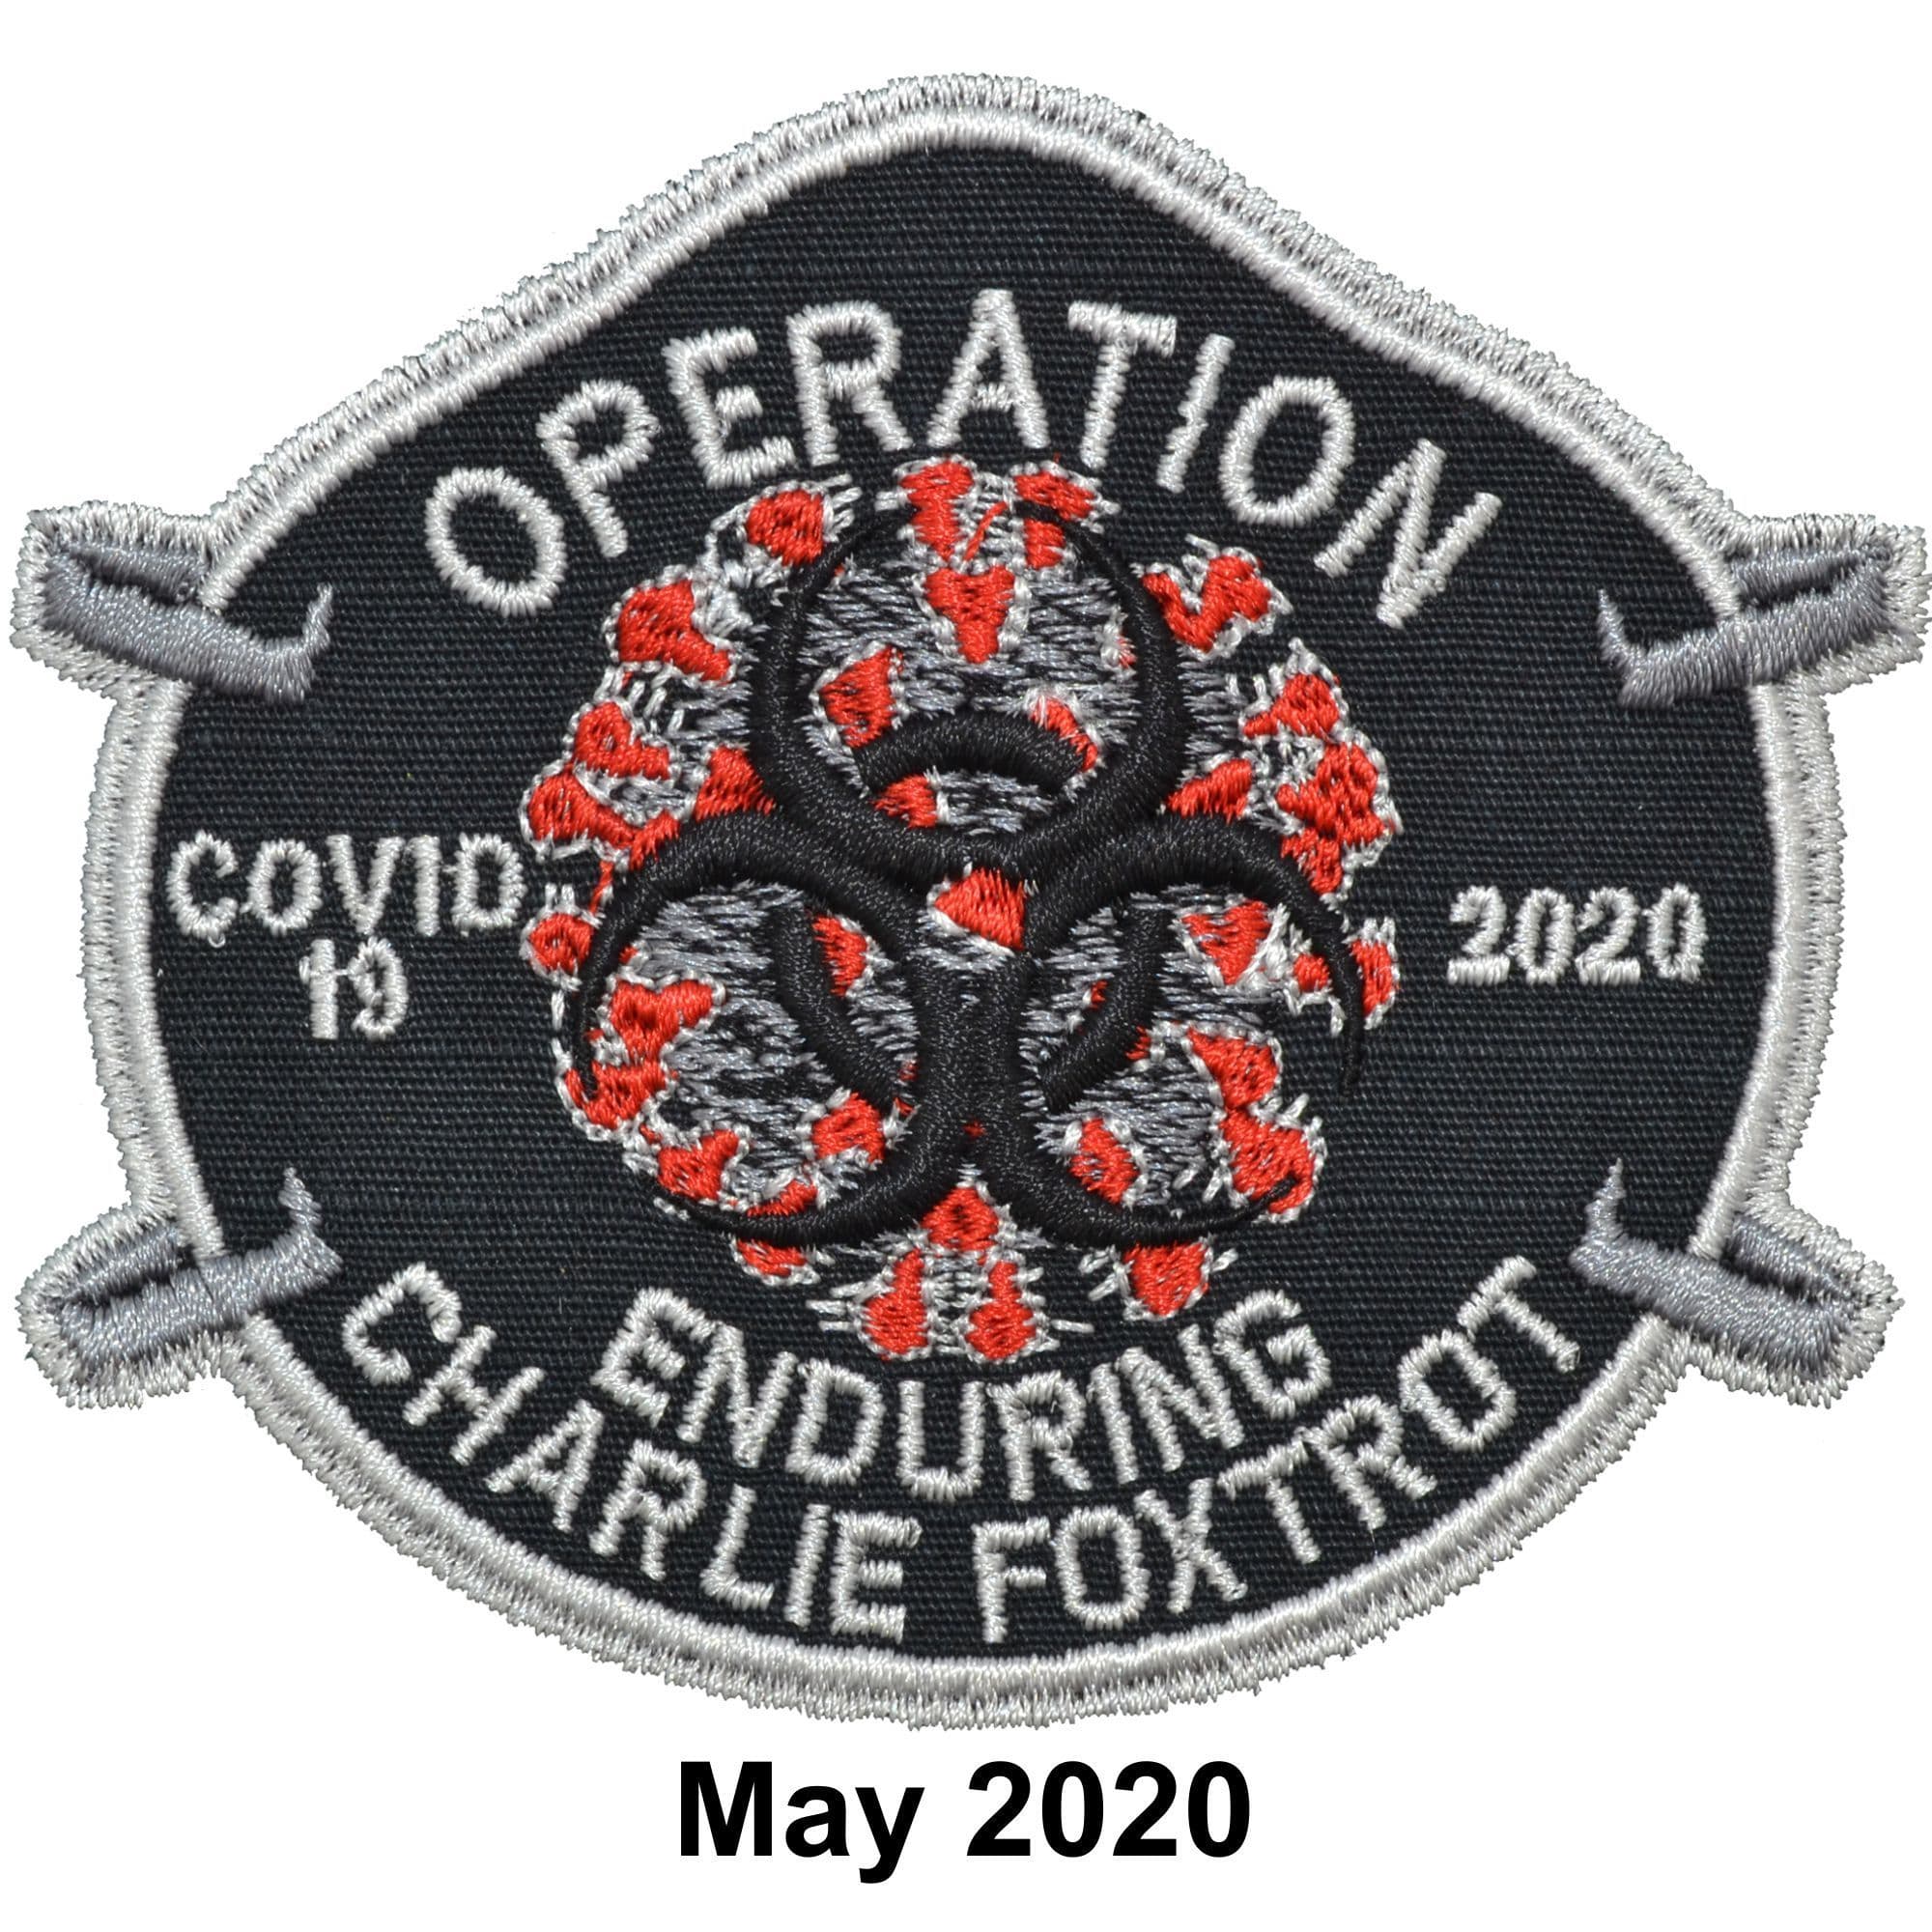 Tactical Gear Junkie Patches Black Operation Enduring Charlie Foxtrot - May 2020 POTM - LIMITED EXTENSION